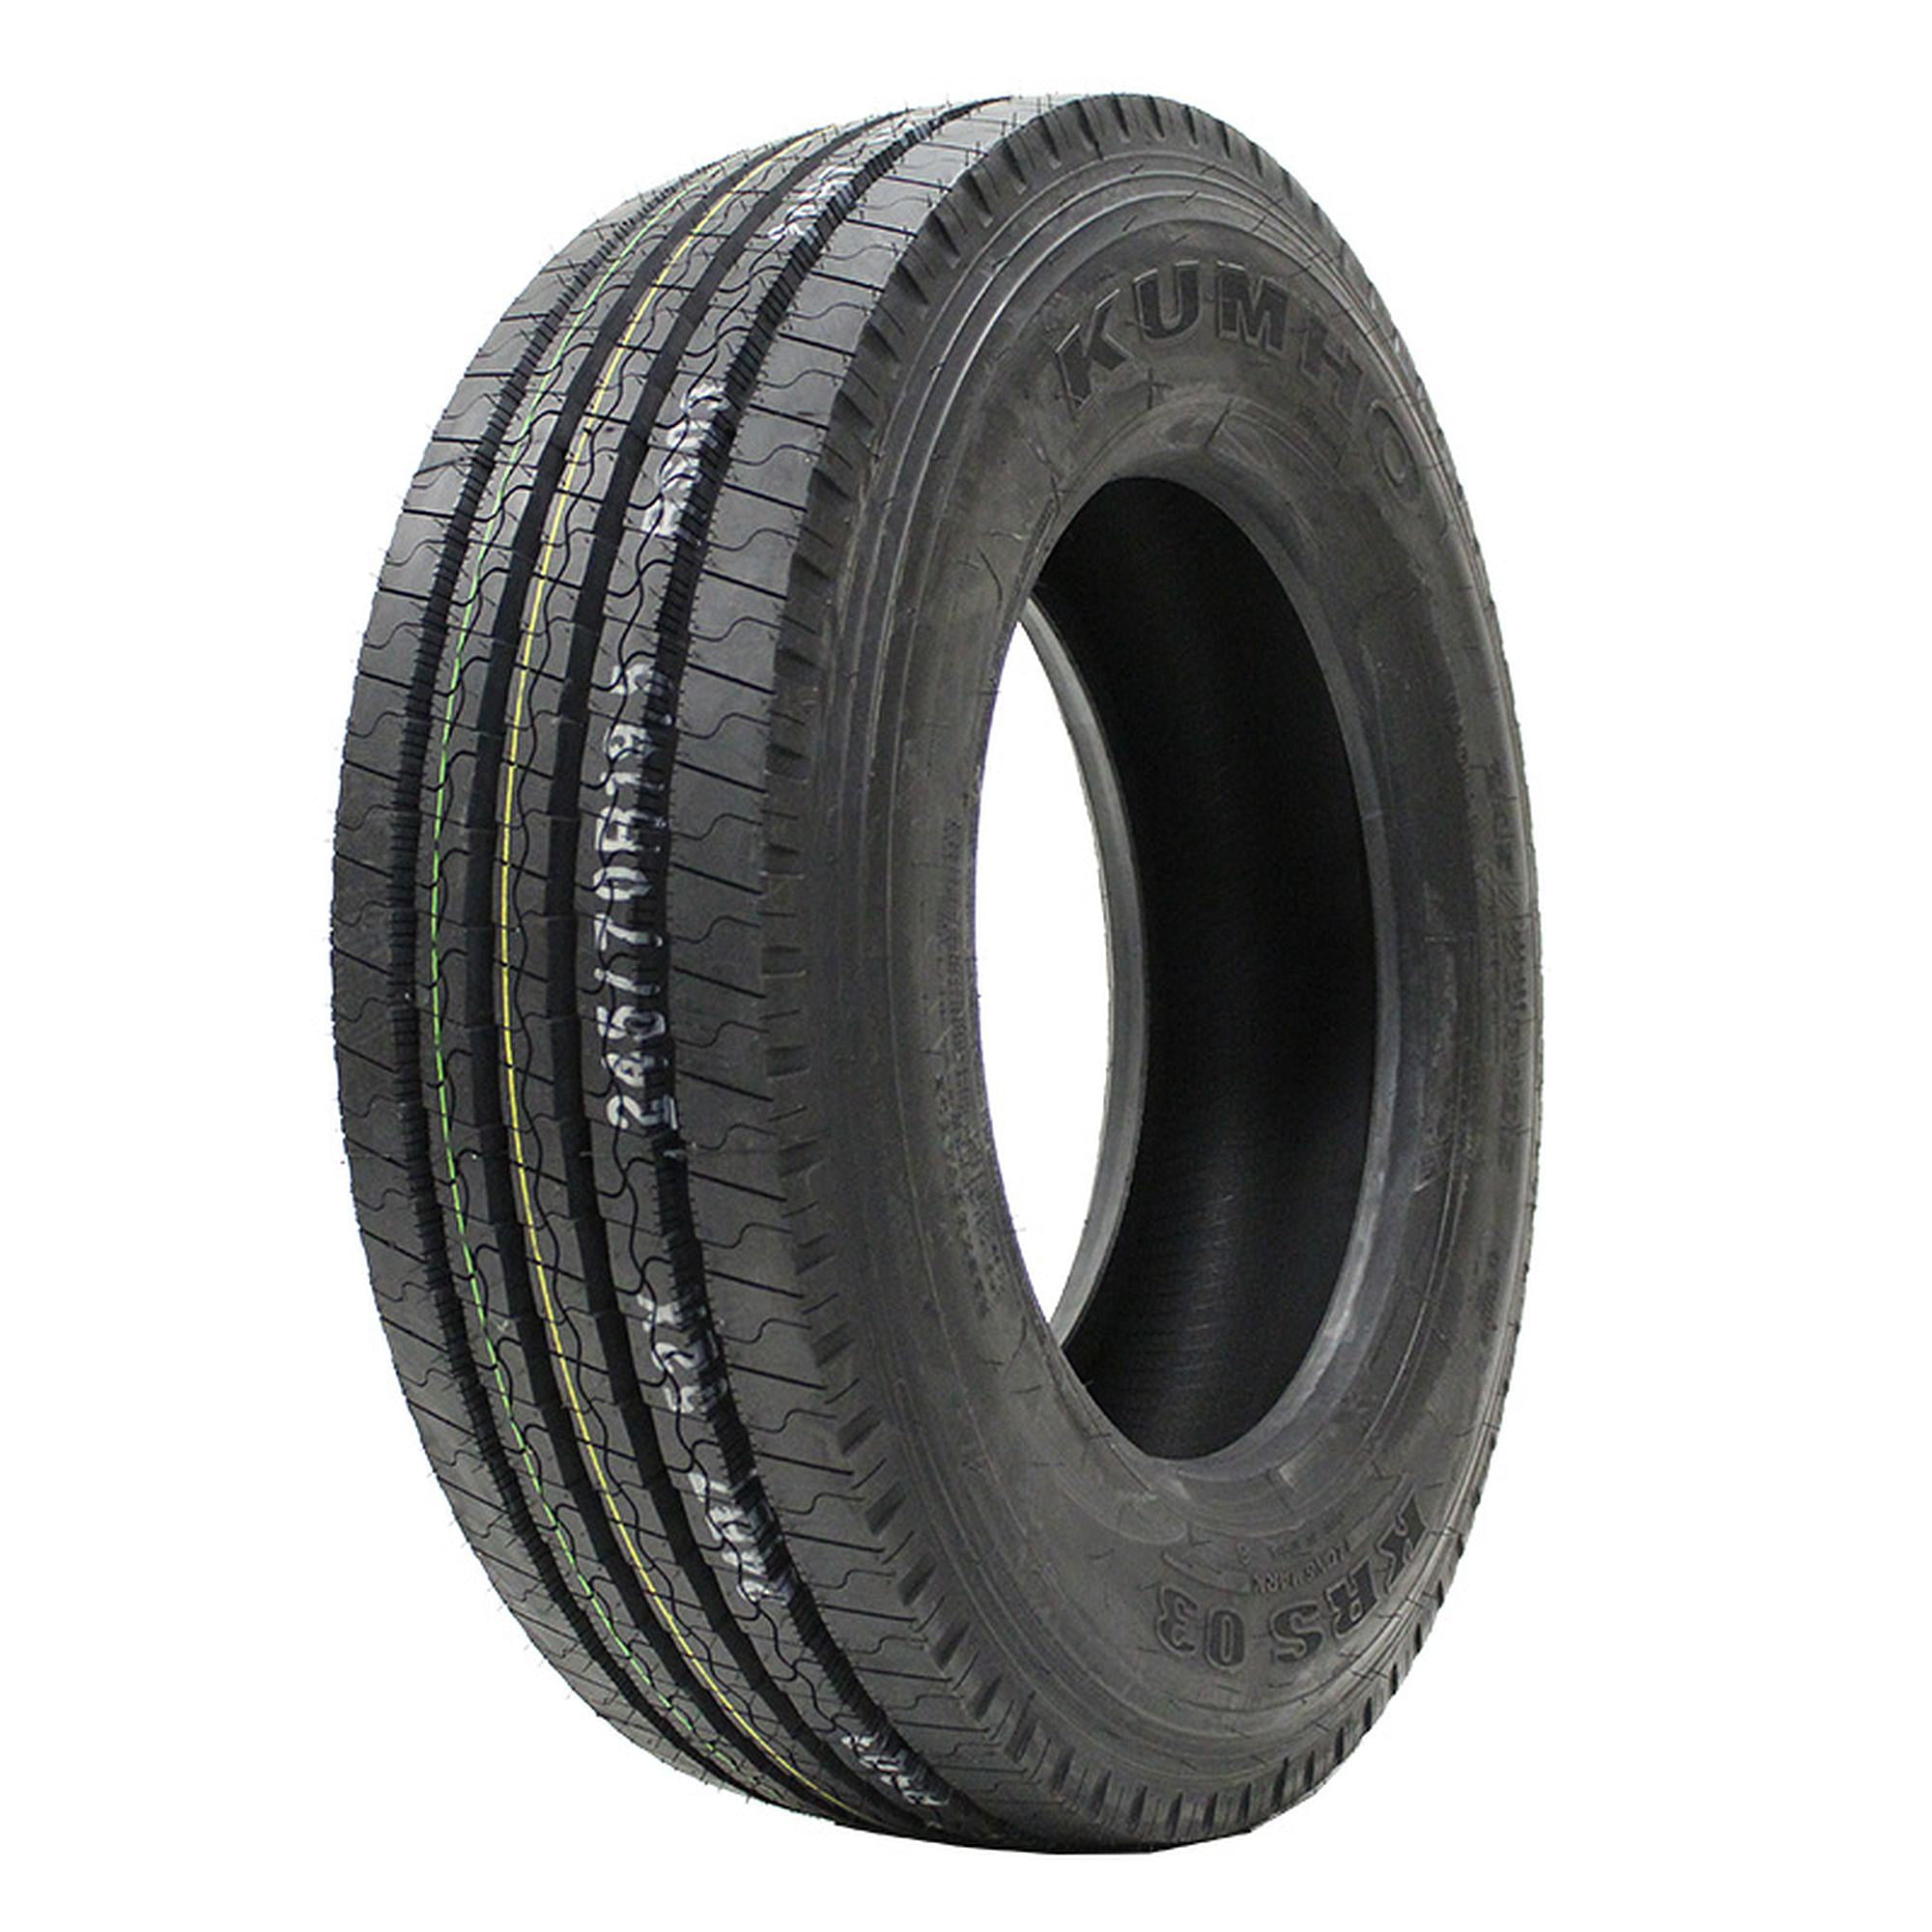 Kumho KRS03 245/70R19.5 135 Commercial Tire